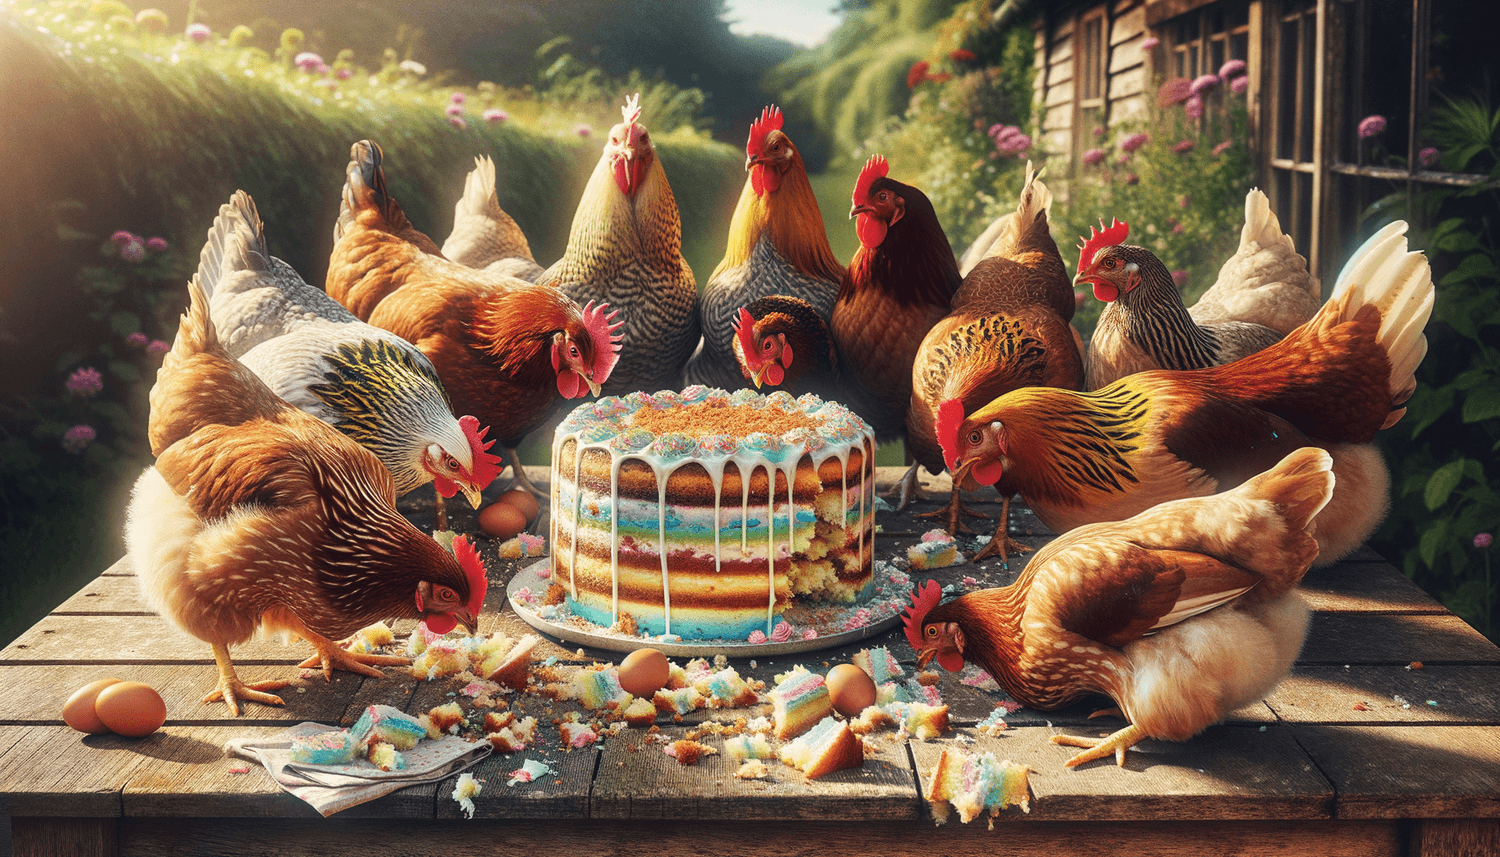 Can Chickens Eat Cake?